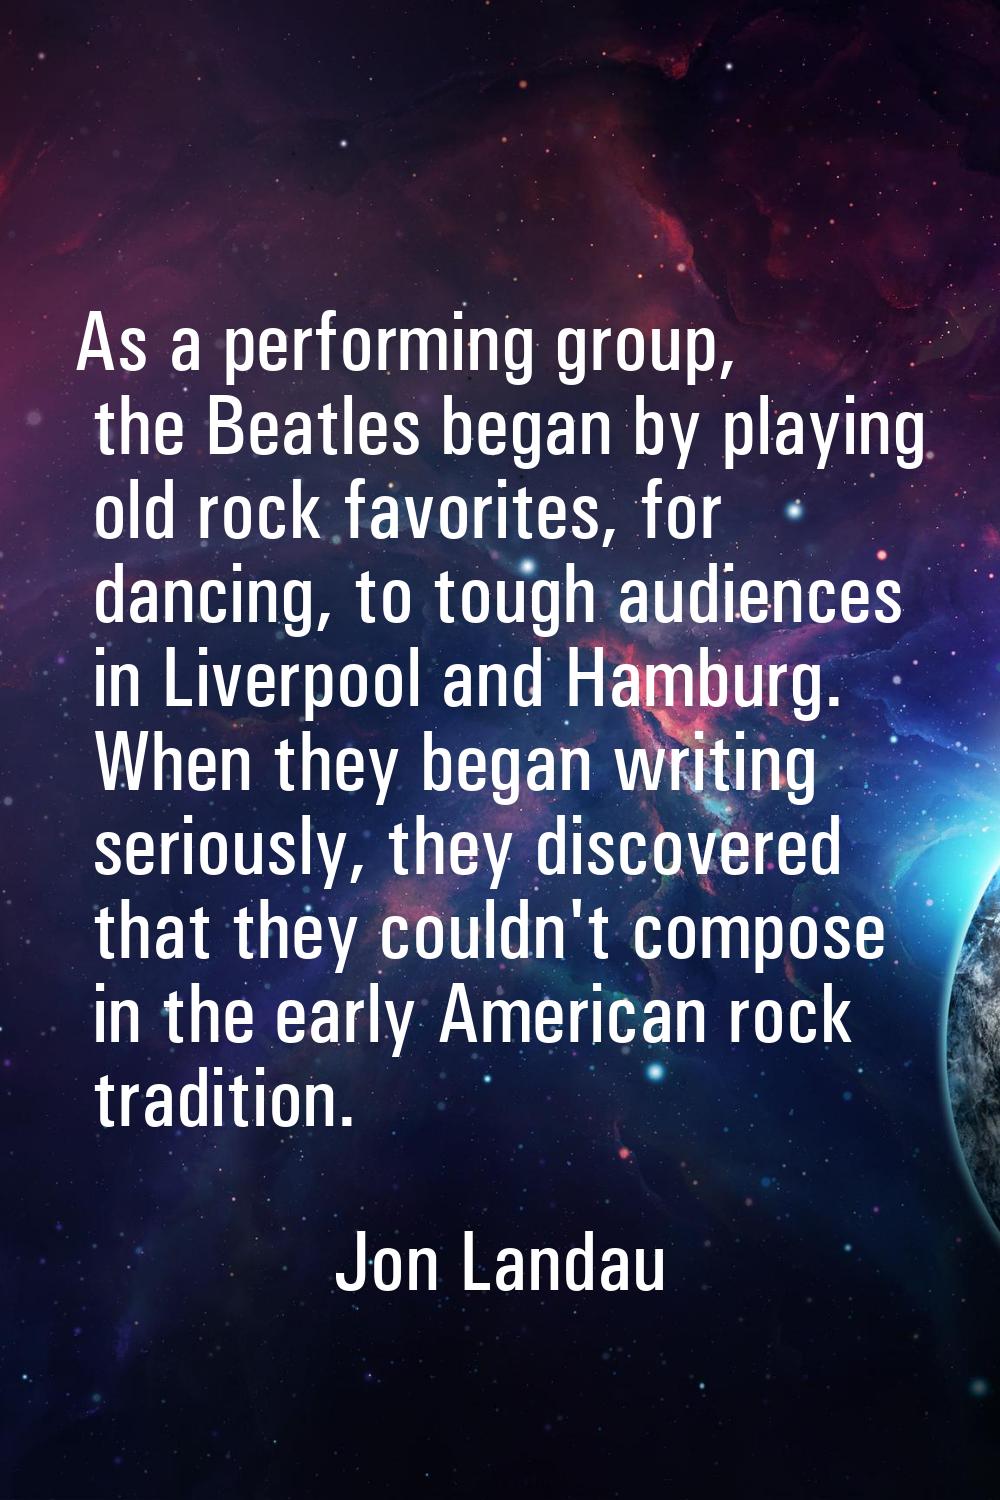 As a performing group, the Beatles began by playing old rock favorites, for dancing, to tough audie